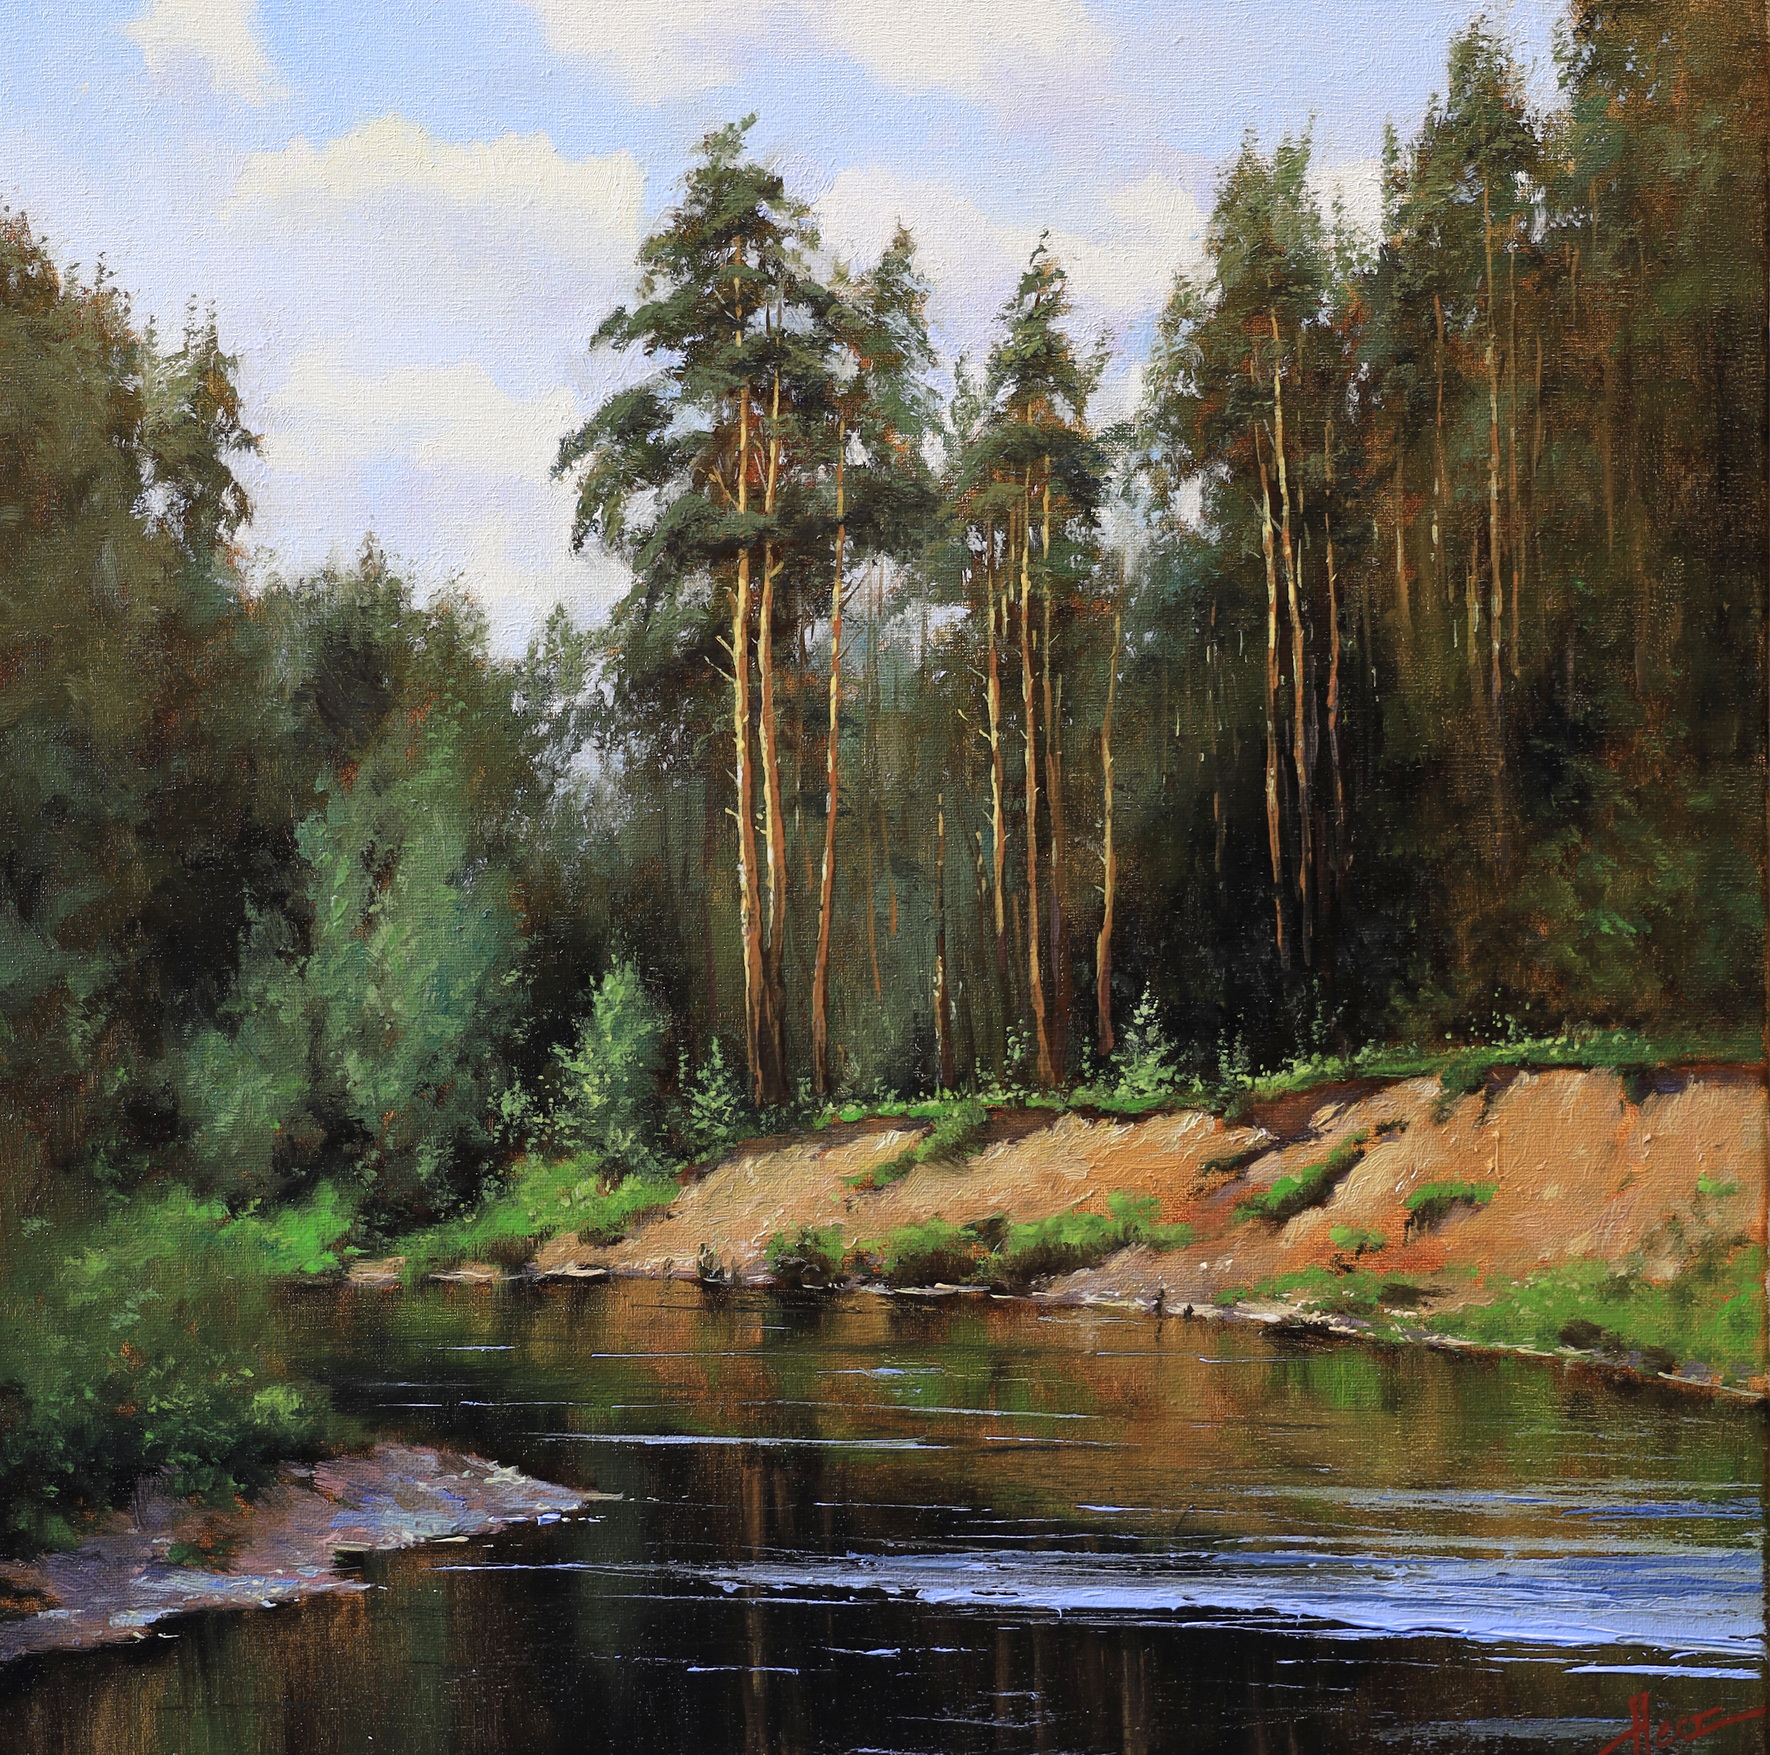 On the River Dubna - 1, Nesterchuk Stepan, Buy the painting Oil